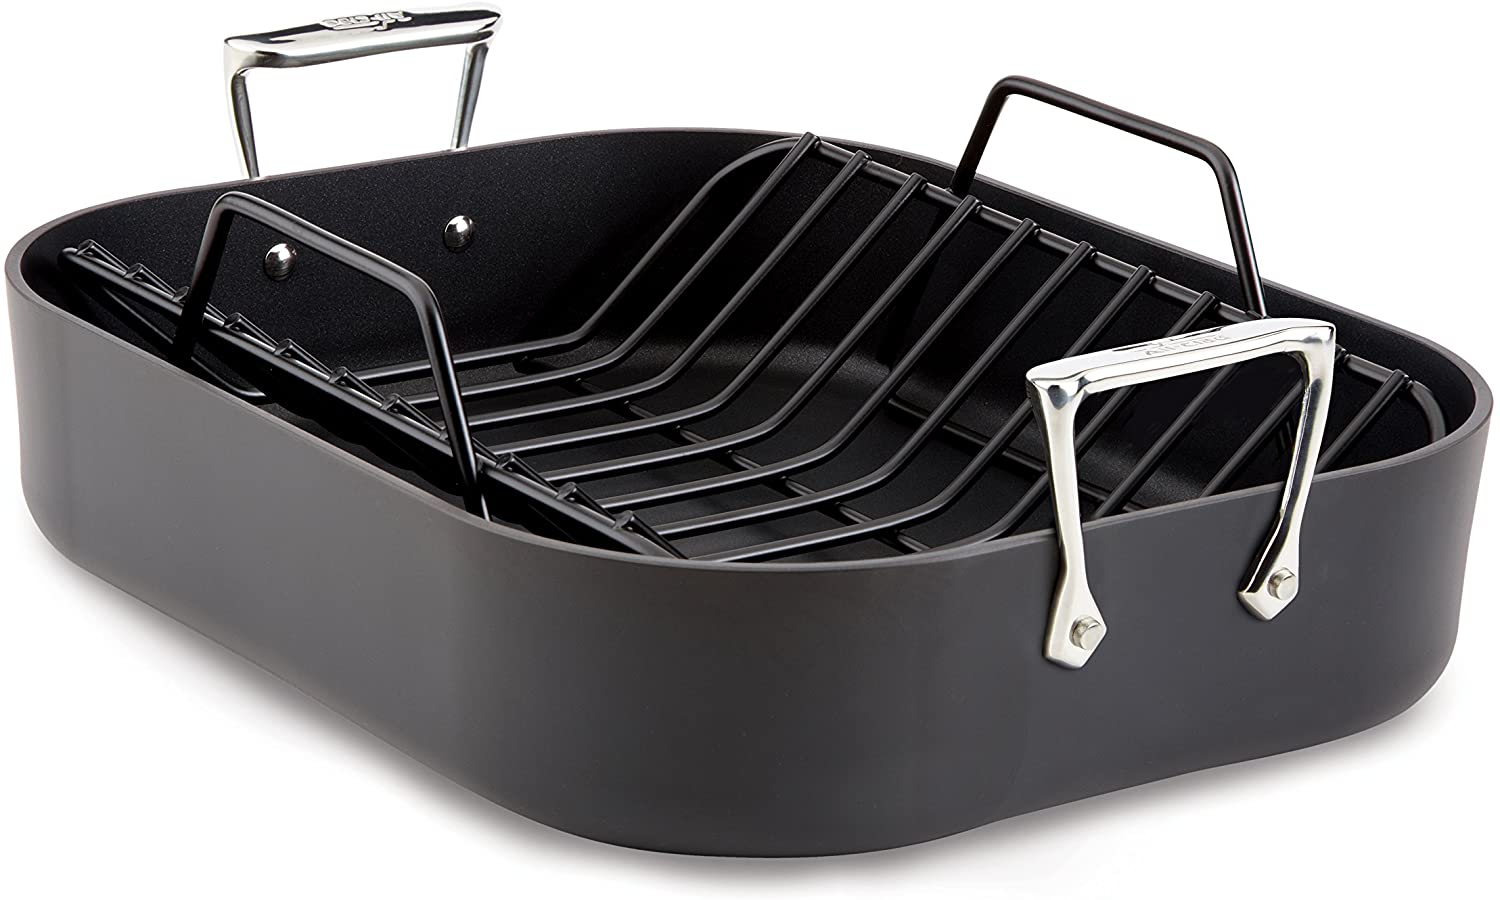 All-Clad Roaster Cookware, 13-Inch by 16-Inch, Black
